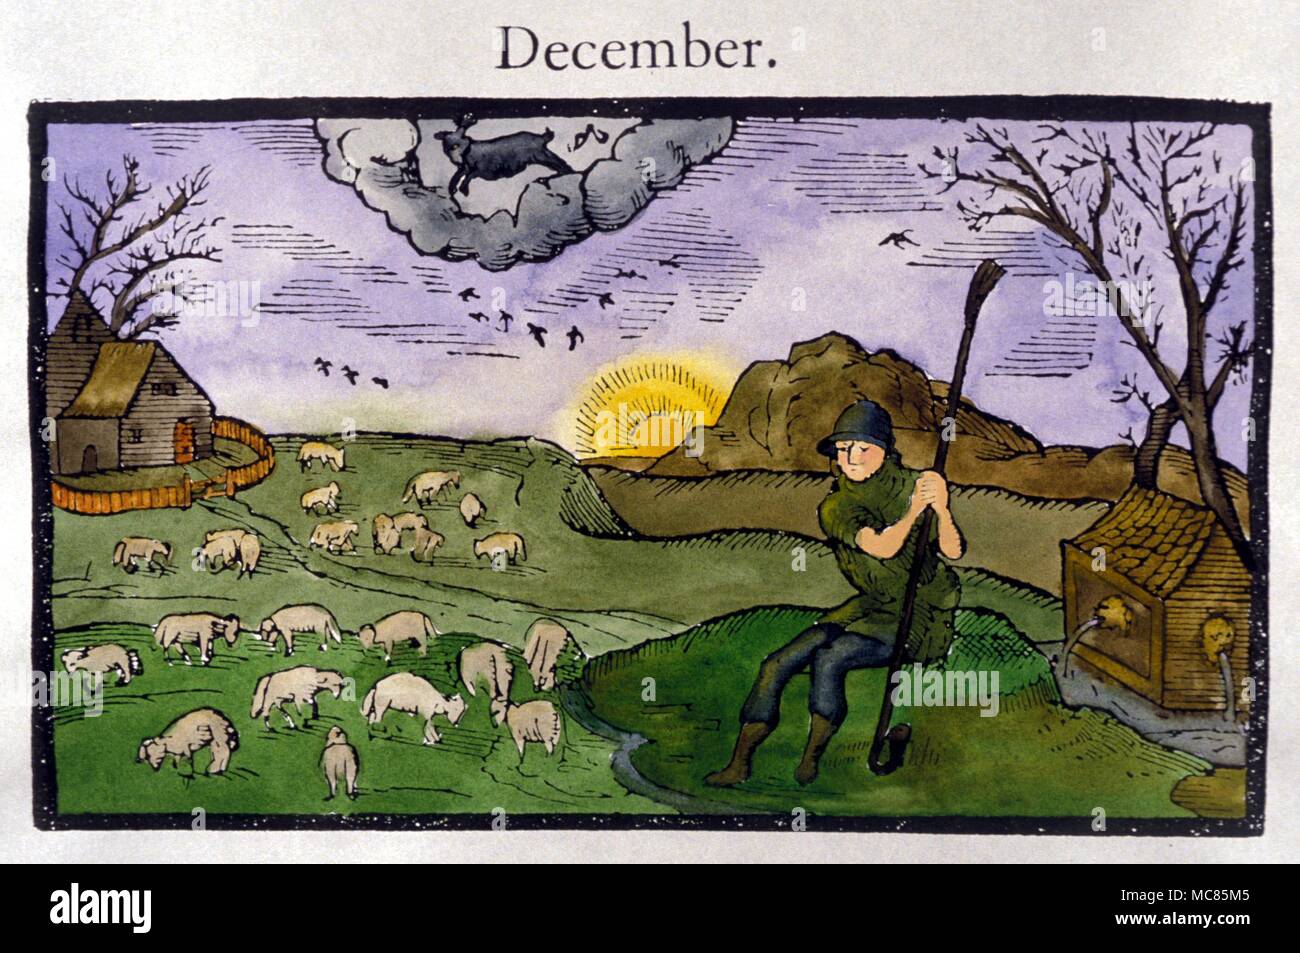 Zodiac Signs - Capricorn. The goat of Capricorn, of the month of December. From the series of 'months' used as vignettes in Edmund Spenser's 'The Fairie Queene', derived from his 'Shepheard's Calendar' of 1579. Stock Photo